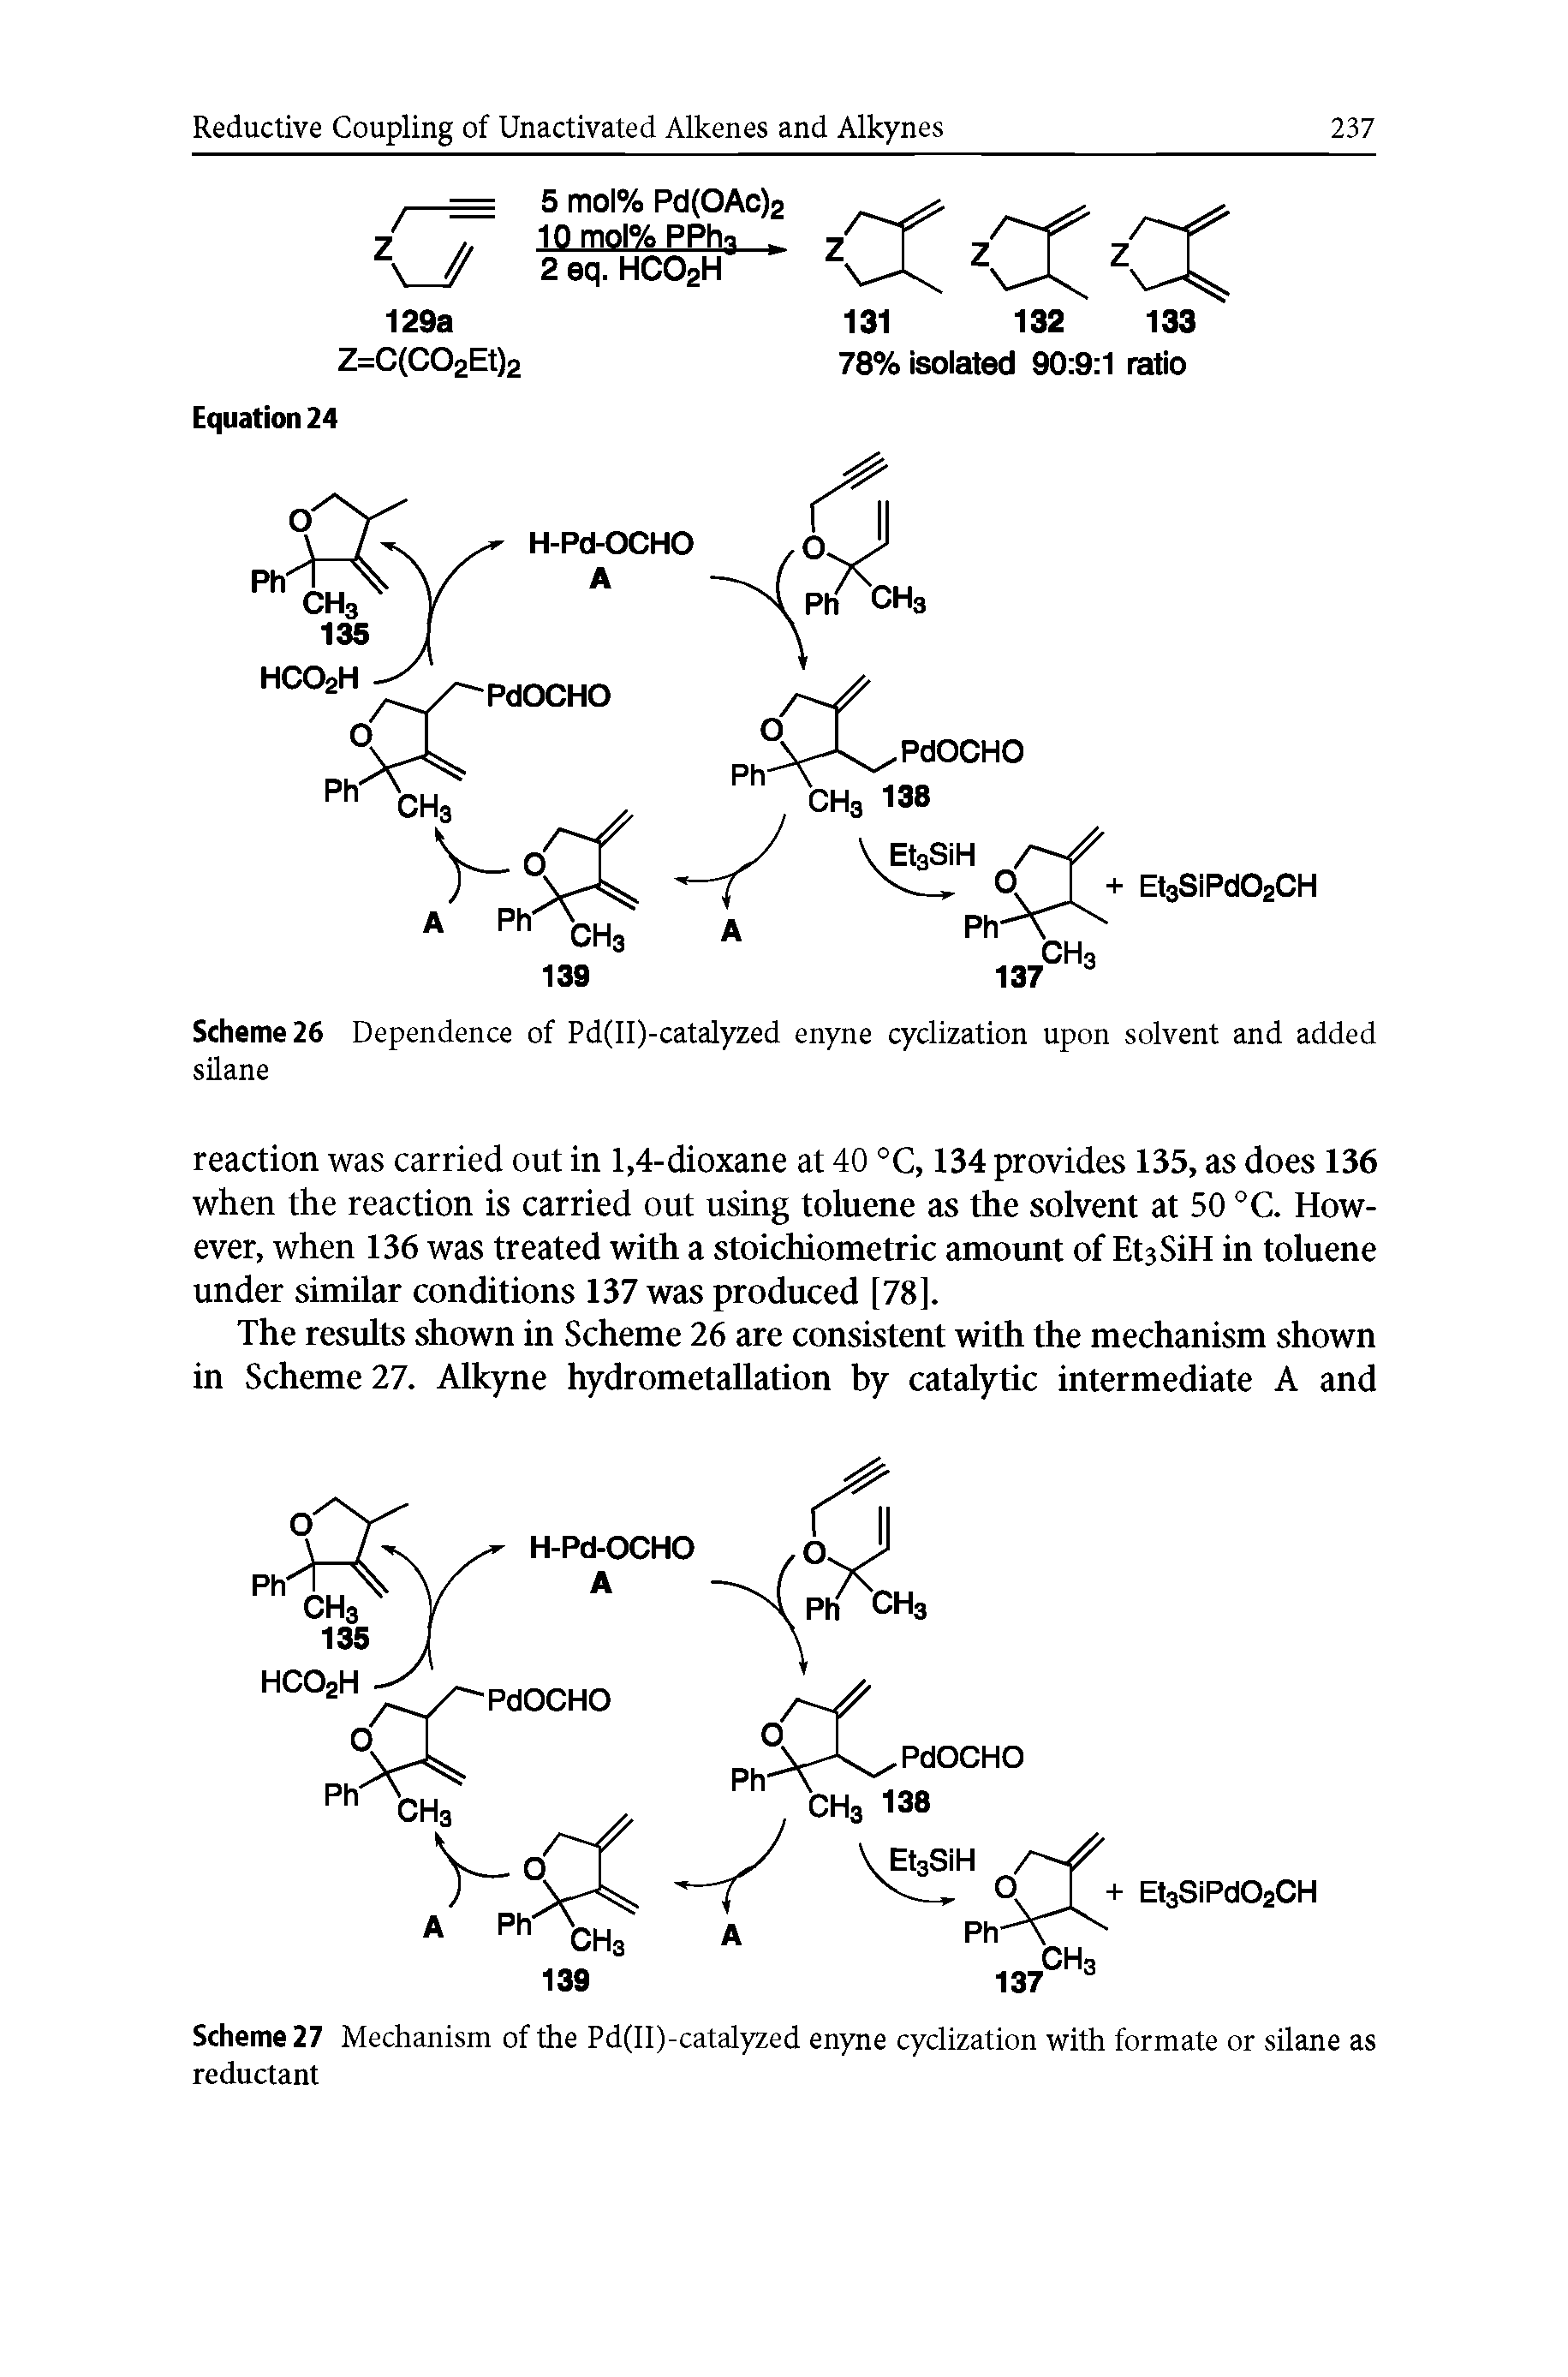 Scheme 27 Mechanism of the Pd(II)-catalyzed enyne cyclization with formate or silane as reductant...